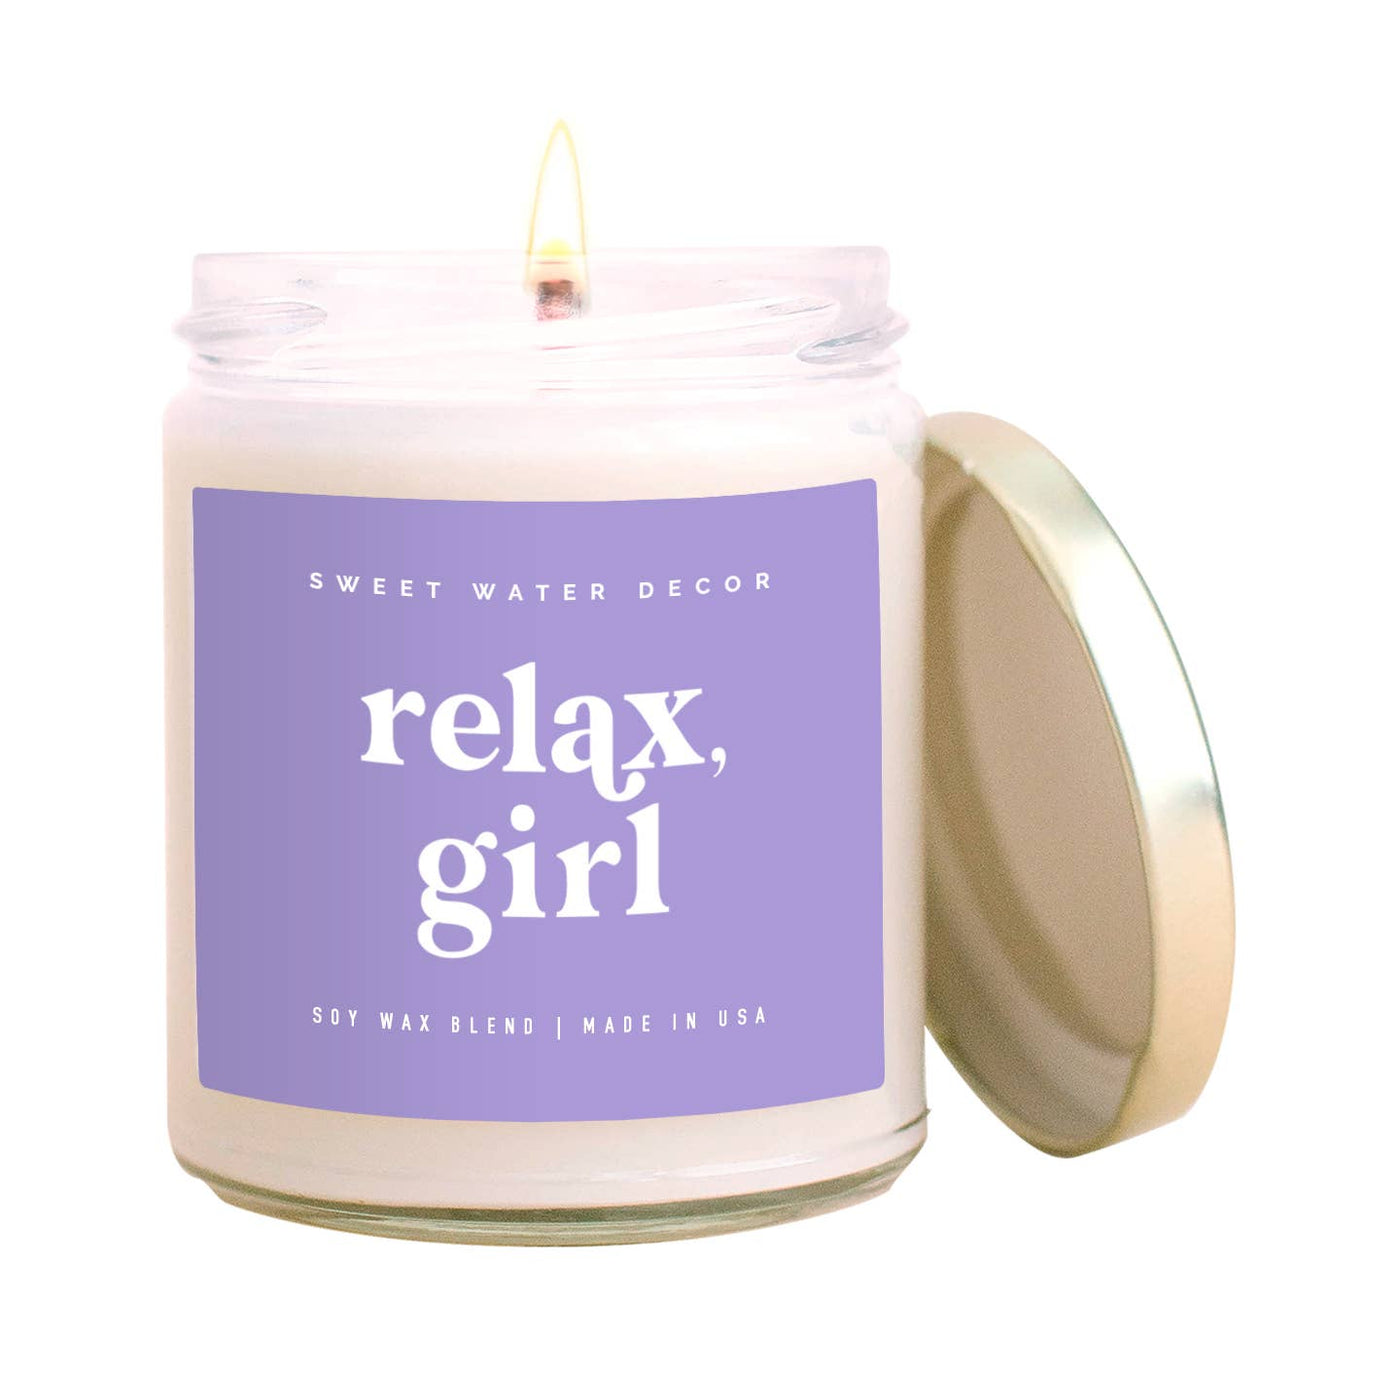 Sweet Water Decor - Relax, Girl Soy Candle - Clear Jar - Violet Purple - 9 oz